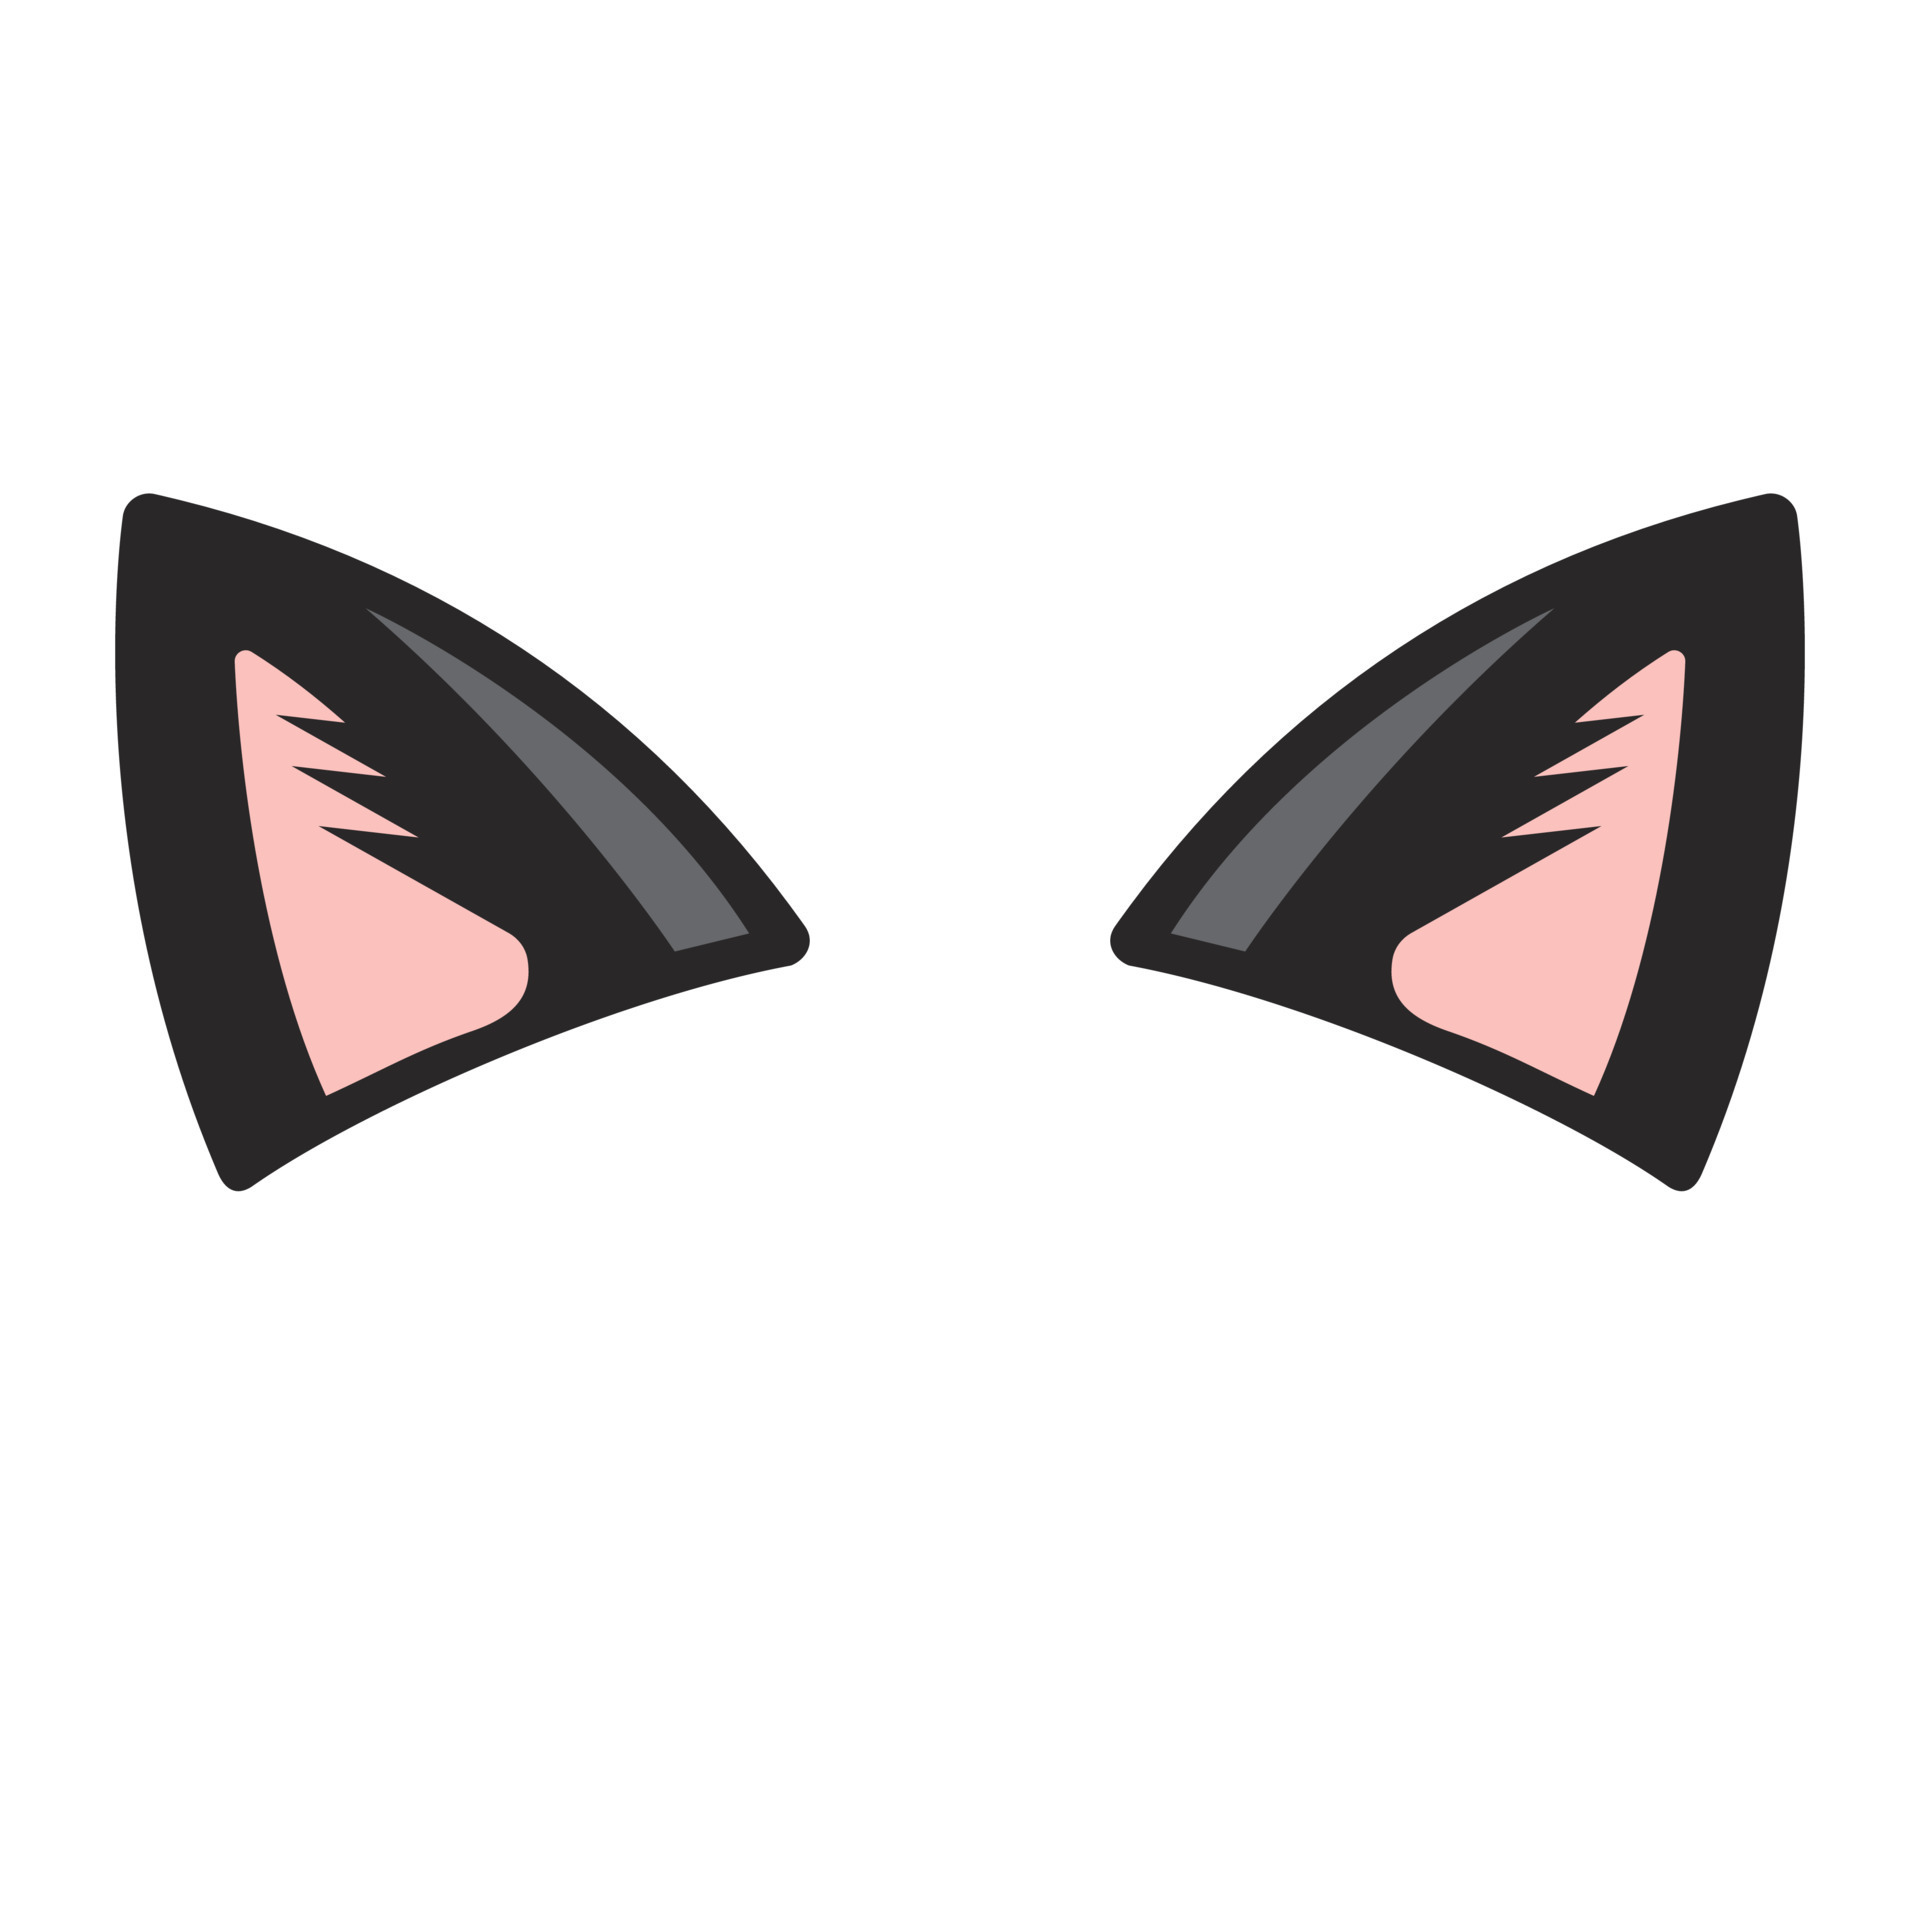 https://static.vecteezy.com/system/resources/previews/013/222/594/original/cat-ear-color-on-a-white-background-illustration-vector.jpg